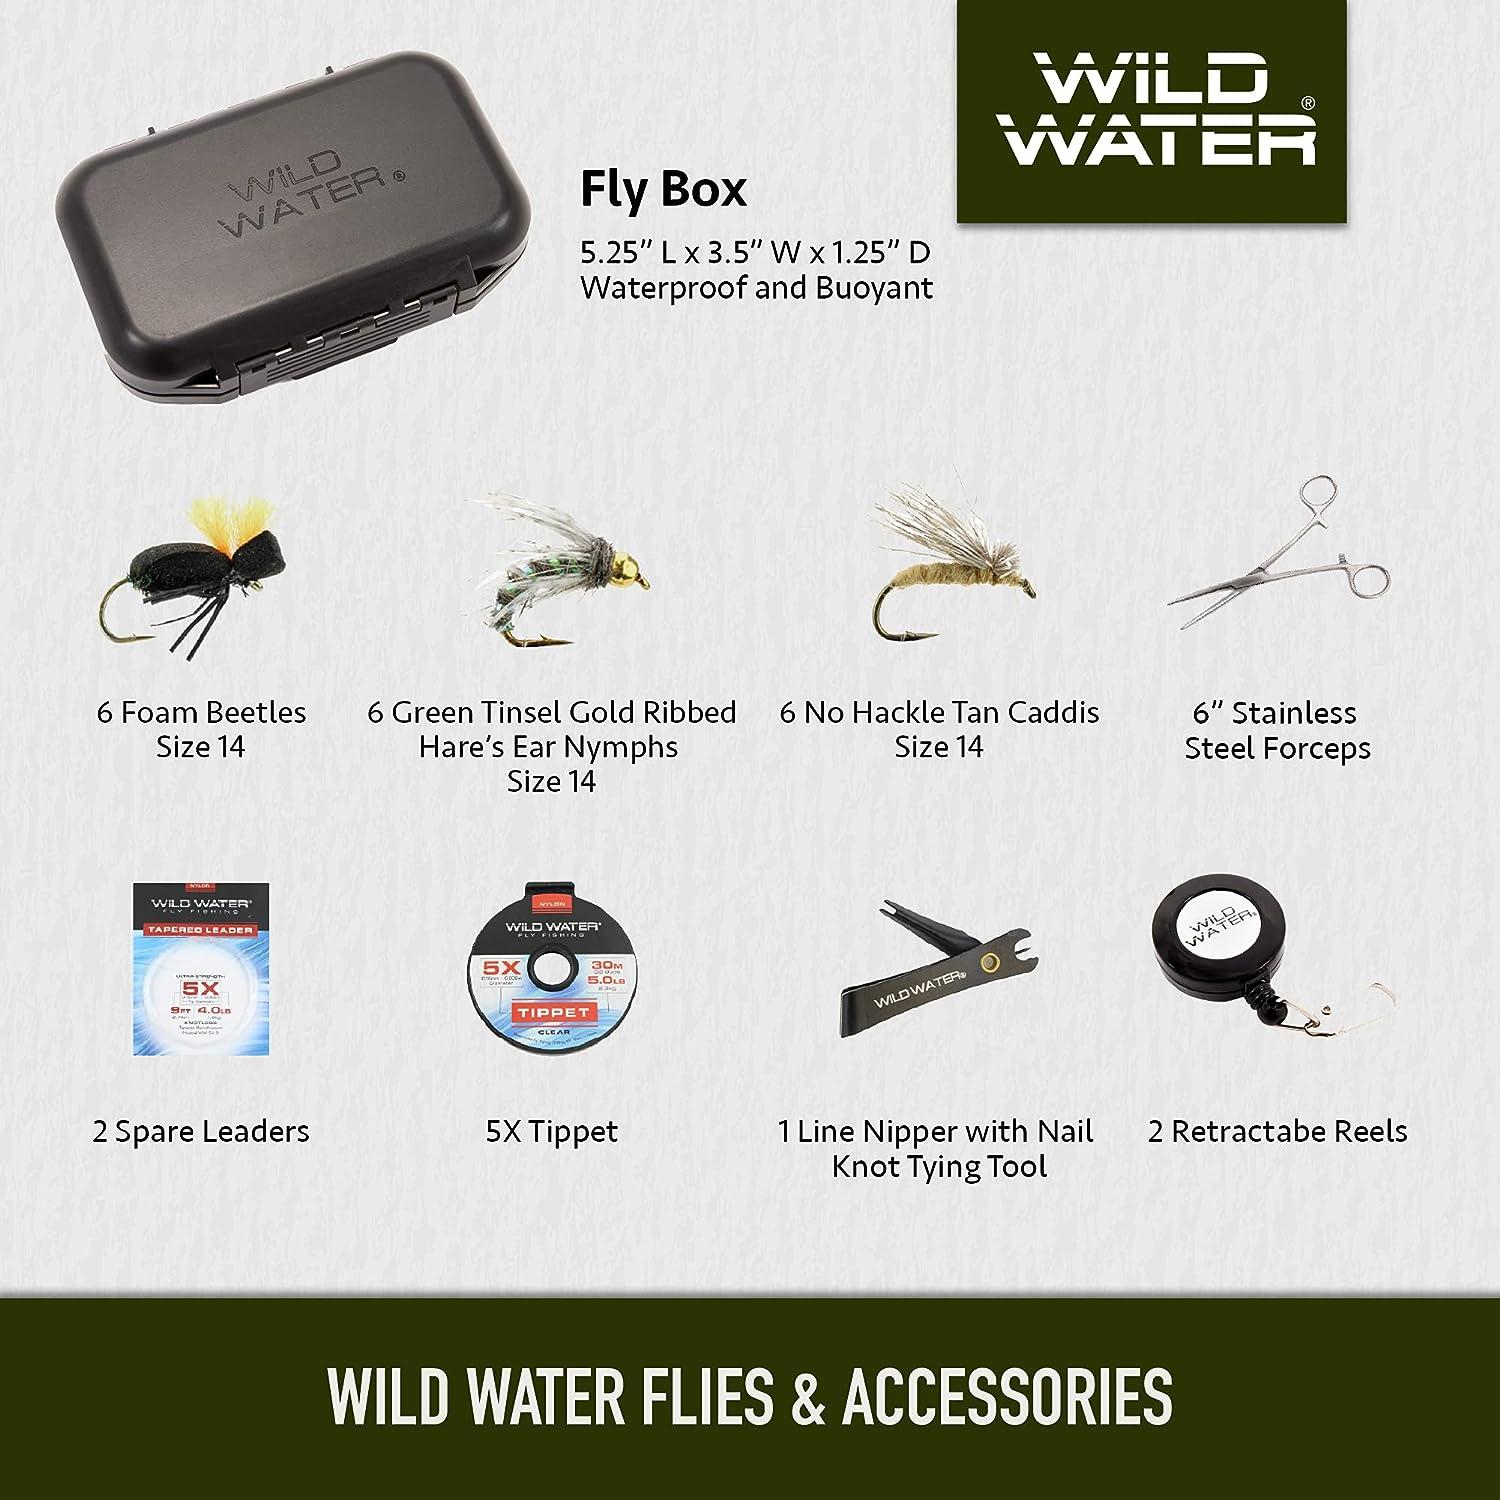 Wild Water Case for Rod, Reel & Accessories (7 Foot, 4 Piece Fly Rod)